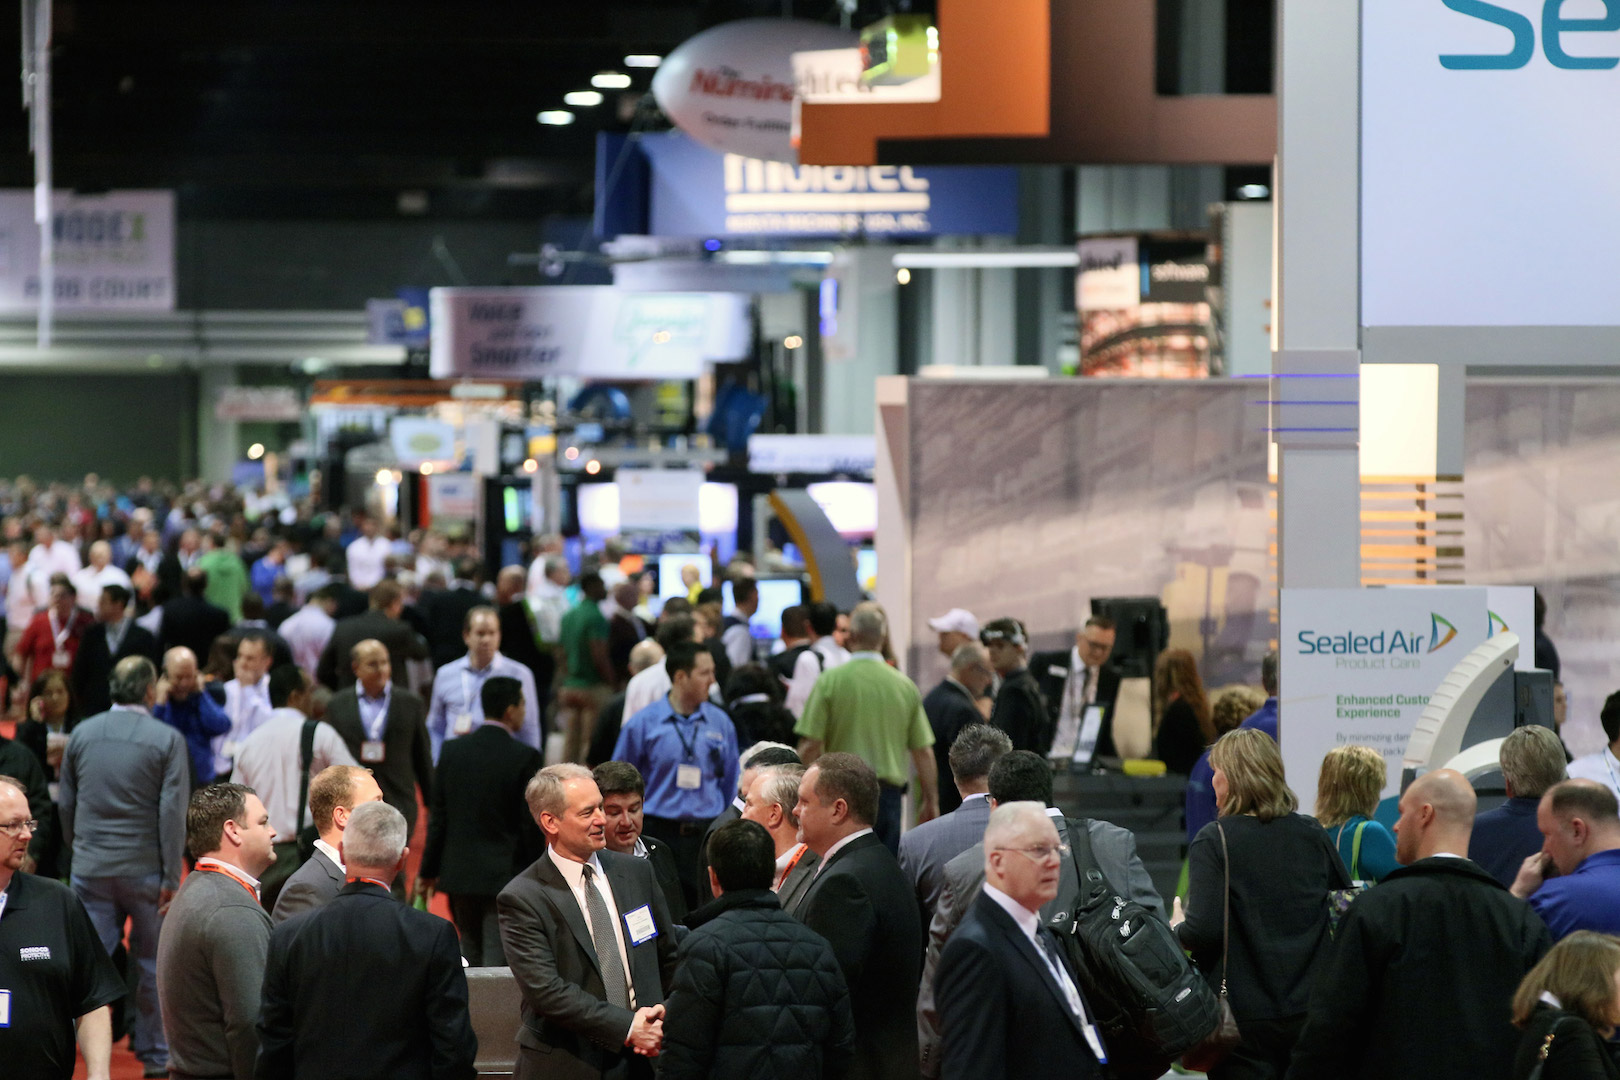 A journalist might visit 50+ exhibits over the course of a trade show.